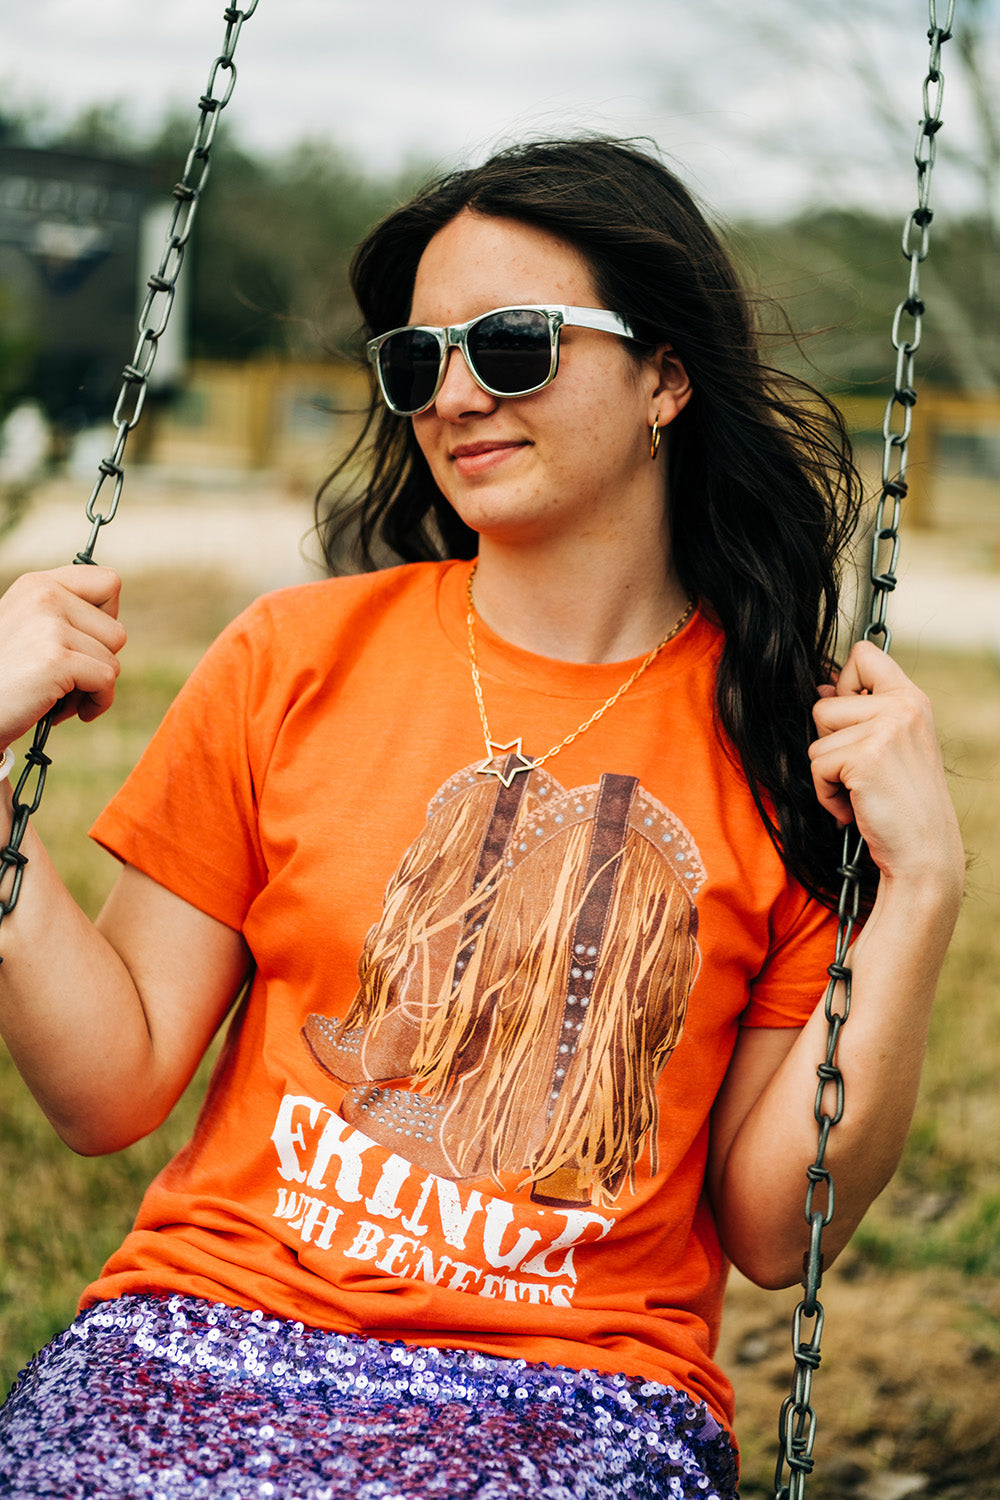 Fringe with Benefits Western Graphic Tee